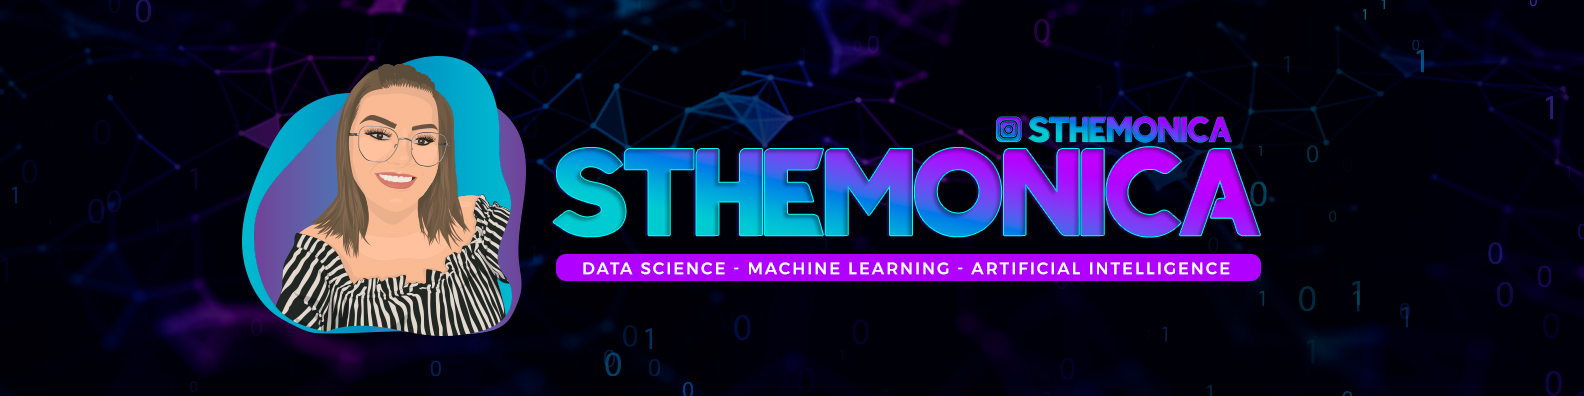 alt-text: Cover image containing a drawing of Sthefanie, with short brown hair and a black and white striped shirt on the left of the image, and in the center of the cover is written "Sthemonica" and just below "data science - machine learning - artificial intelligence". Predominantly dark purple background.